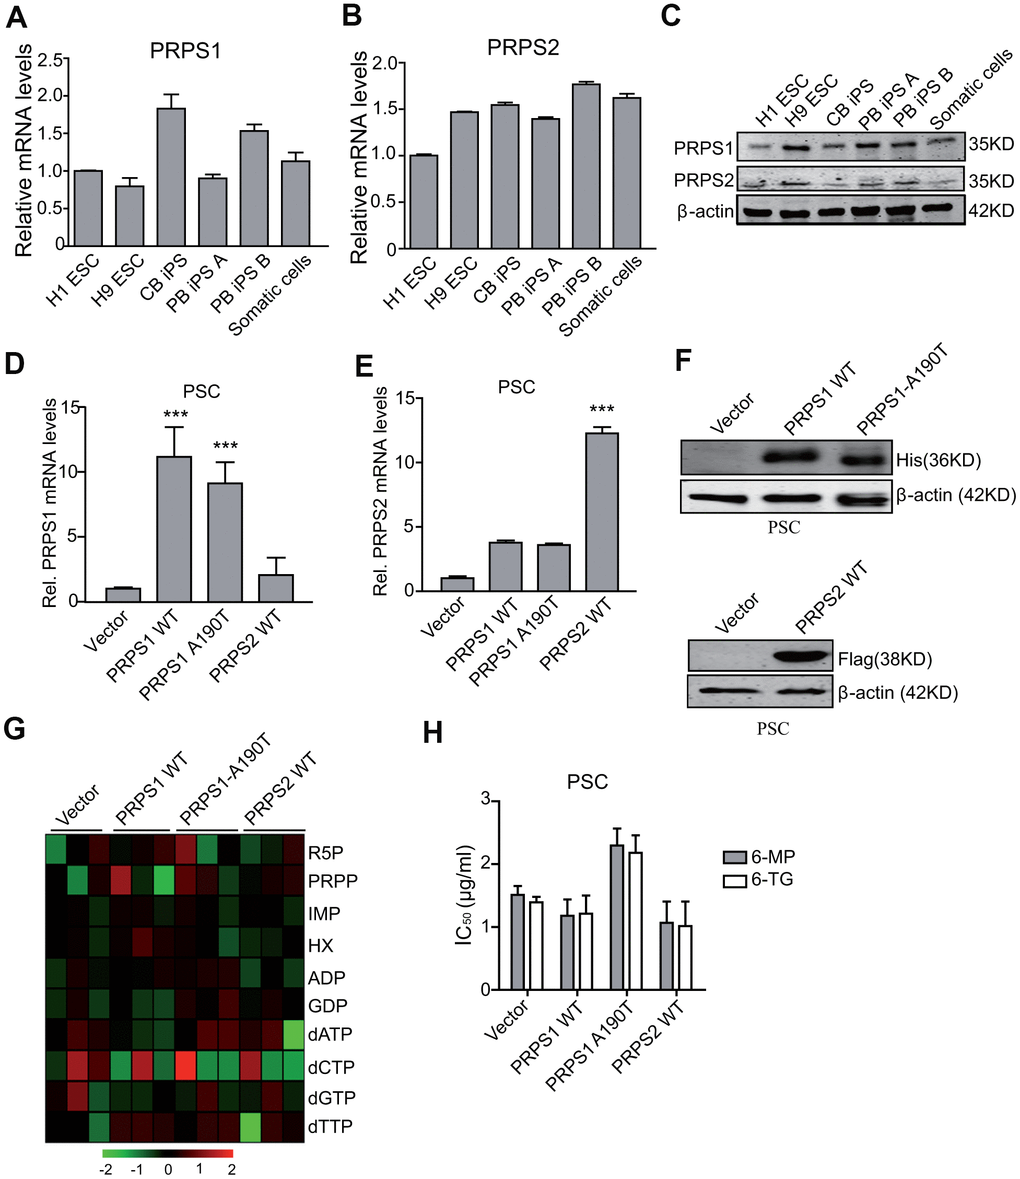 Ectopic expression of PRPS1 or PRPS2 has no effects on cell metabolism and drug resistance in PSCs. (A, B) qRT-PCR analysis of PRPS1 (A) and PRPS2 (B) mRNA levels in various PSCs and somatic cells. CB iPS, induced pluripotency stem cell derived from cord blood; PB iPS A or B, induced pluripotency stem cell derived from peripheral blood of two different healthy human. (C) WB of endogenous expression of PRPS1 and PRPS2 in PSCs and somatic cells from (A, B). (D, E) qRT-PCR analysis of overexpression of PRPS1 wild type (WT), WT PRPS2, or PRPS1 A190T mutant in PSCs (CB iPS cells). (F) WB of overexpression of PRPS1, PRPS2 or PRPS1 A190T mutant in PSCs from (D). (G) Heatmap showing the metabolomics in the PSCs from (D). (H) Effect of 6-MP or 6-TG treatment on PSCs viability. ***PD, E and H), data are expressed as the mean ± SD. *P P t-test. Data are representative of three independent experiments with similar results.